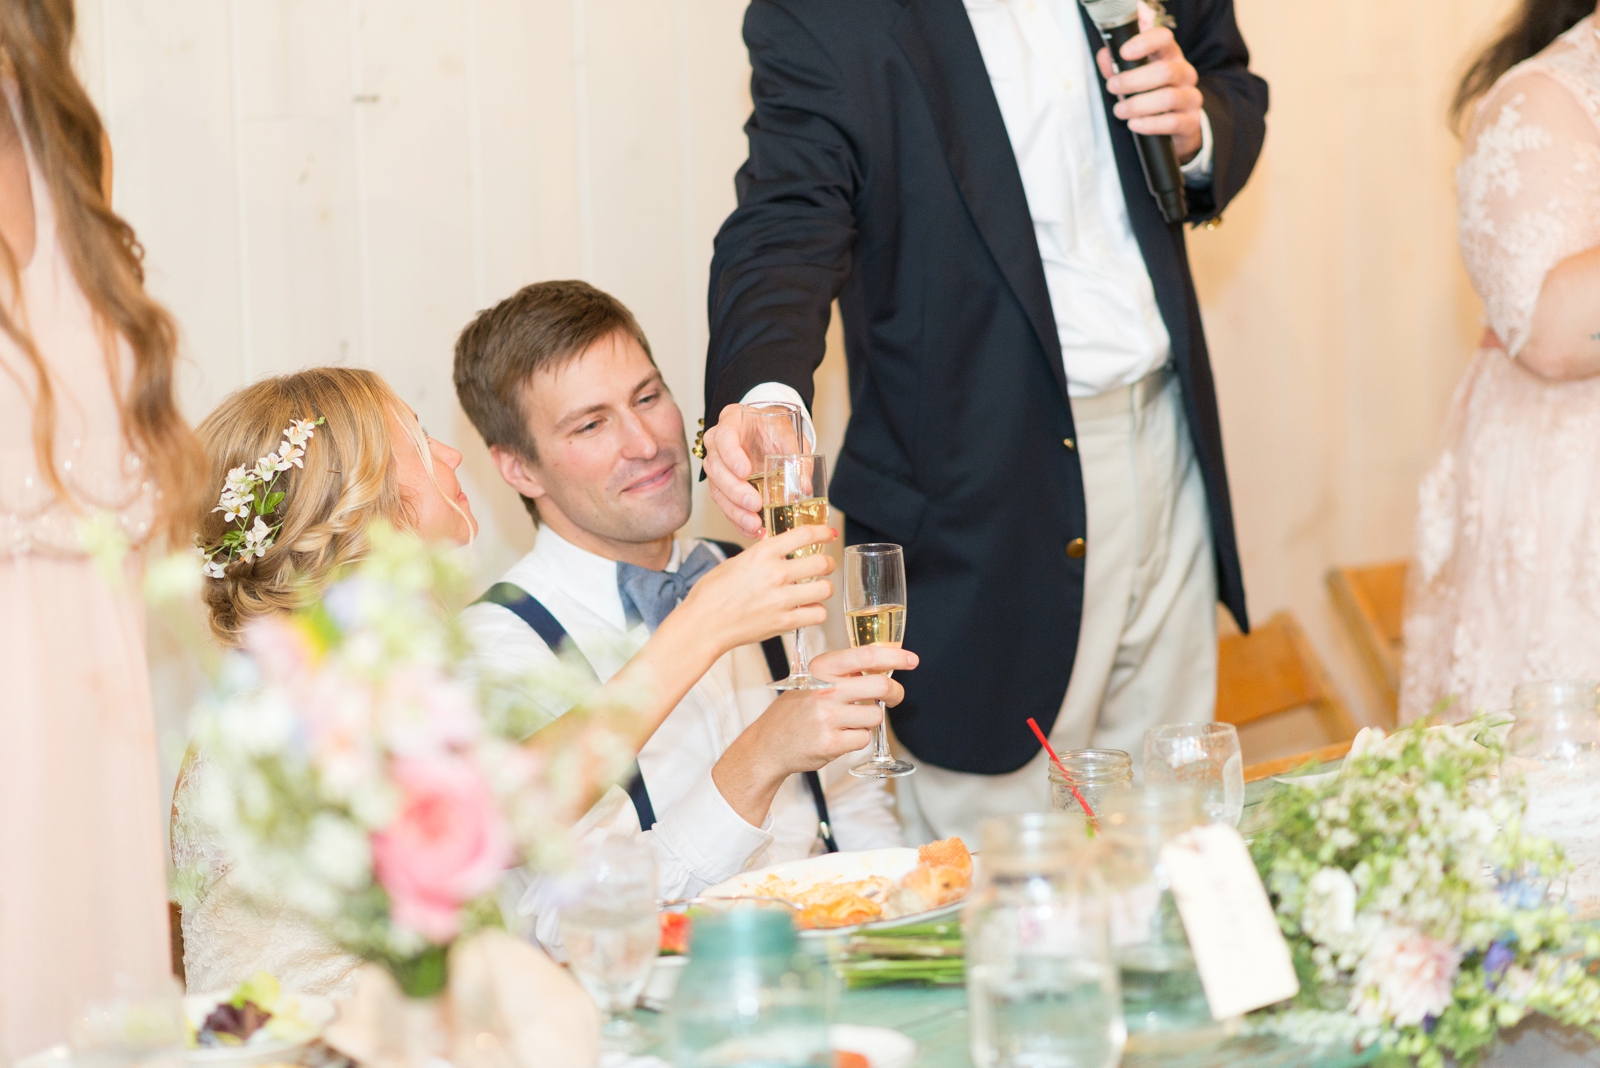 father-of-the-bride-giving-a-wedding-reception-toast